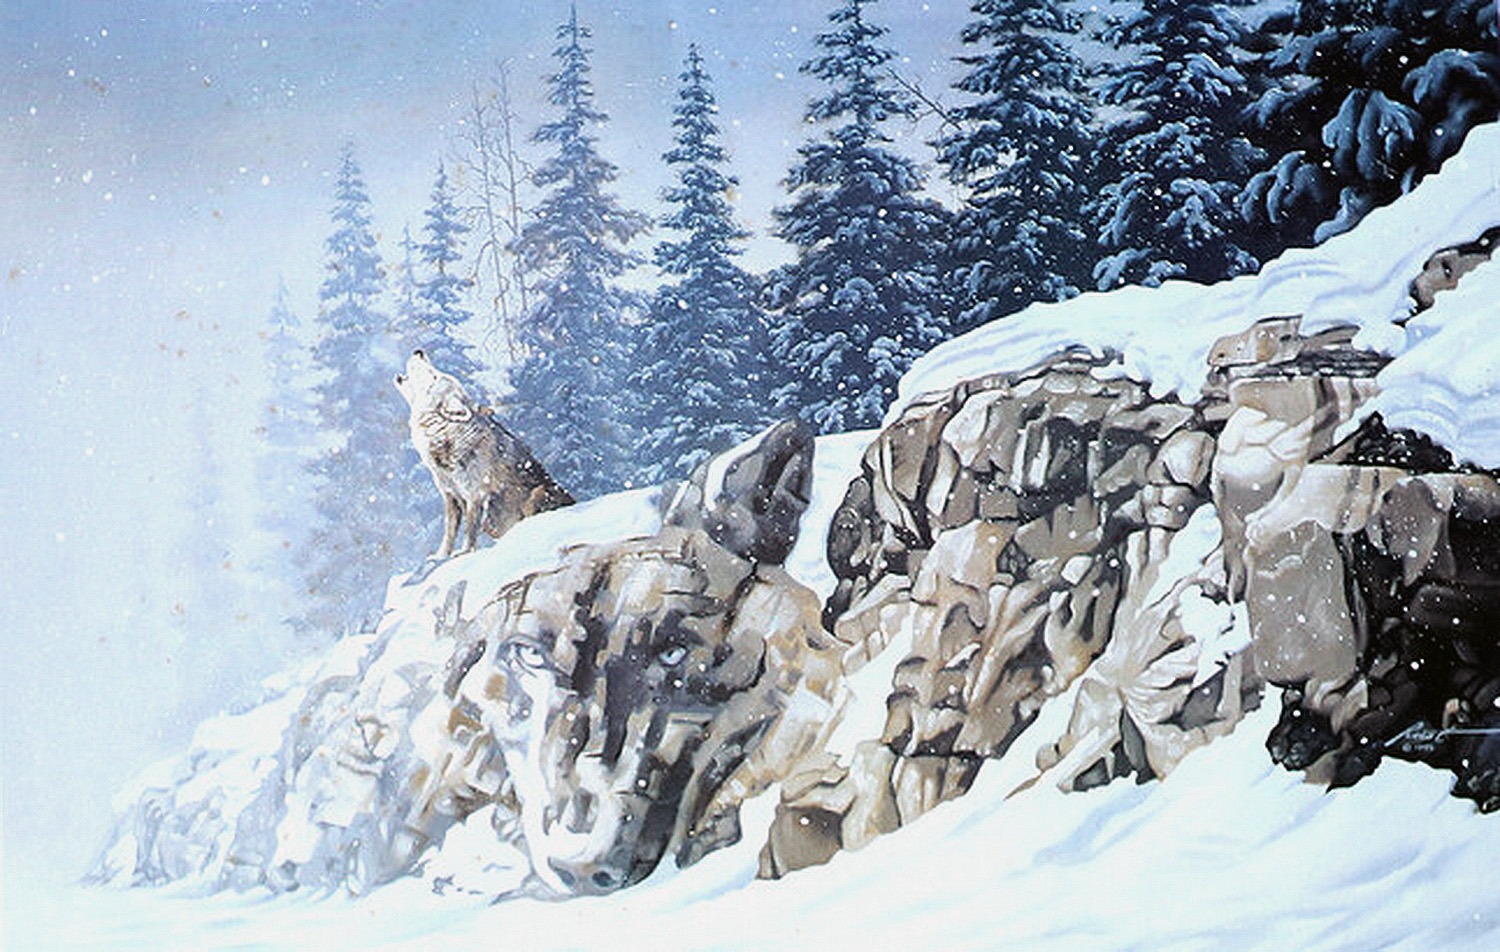 Want to find the hidden faces in this painting? You might have a ... ahem ... ROCKY time. Try not to howl in frustration!